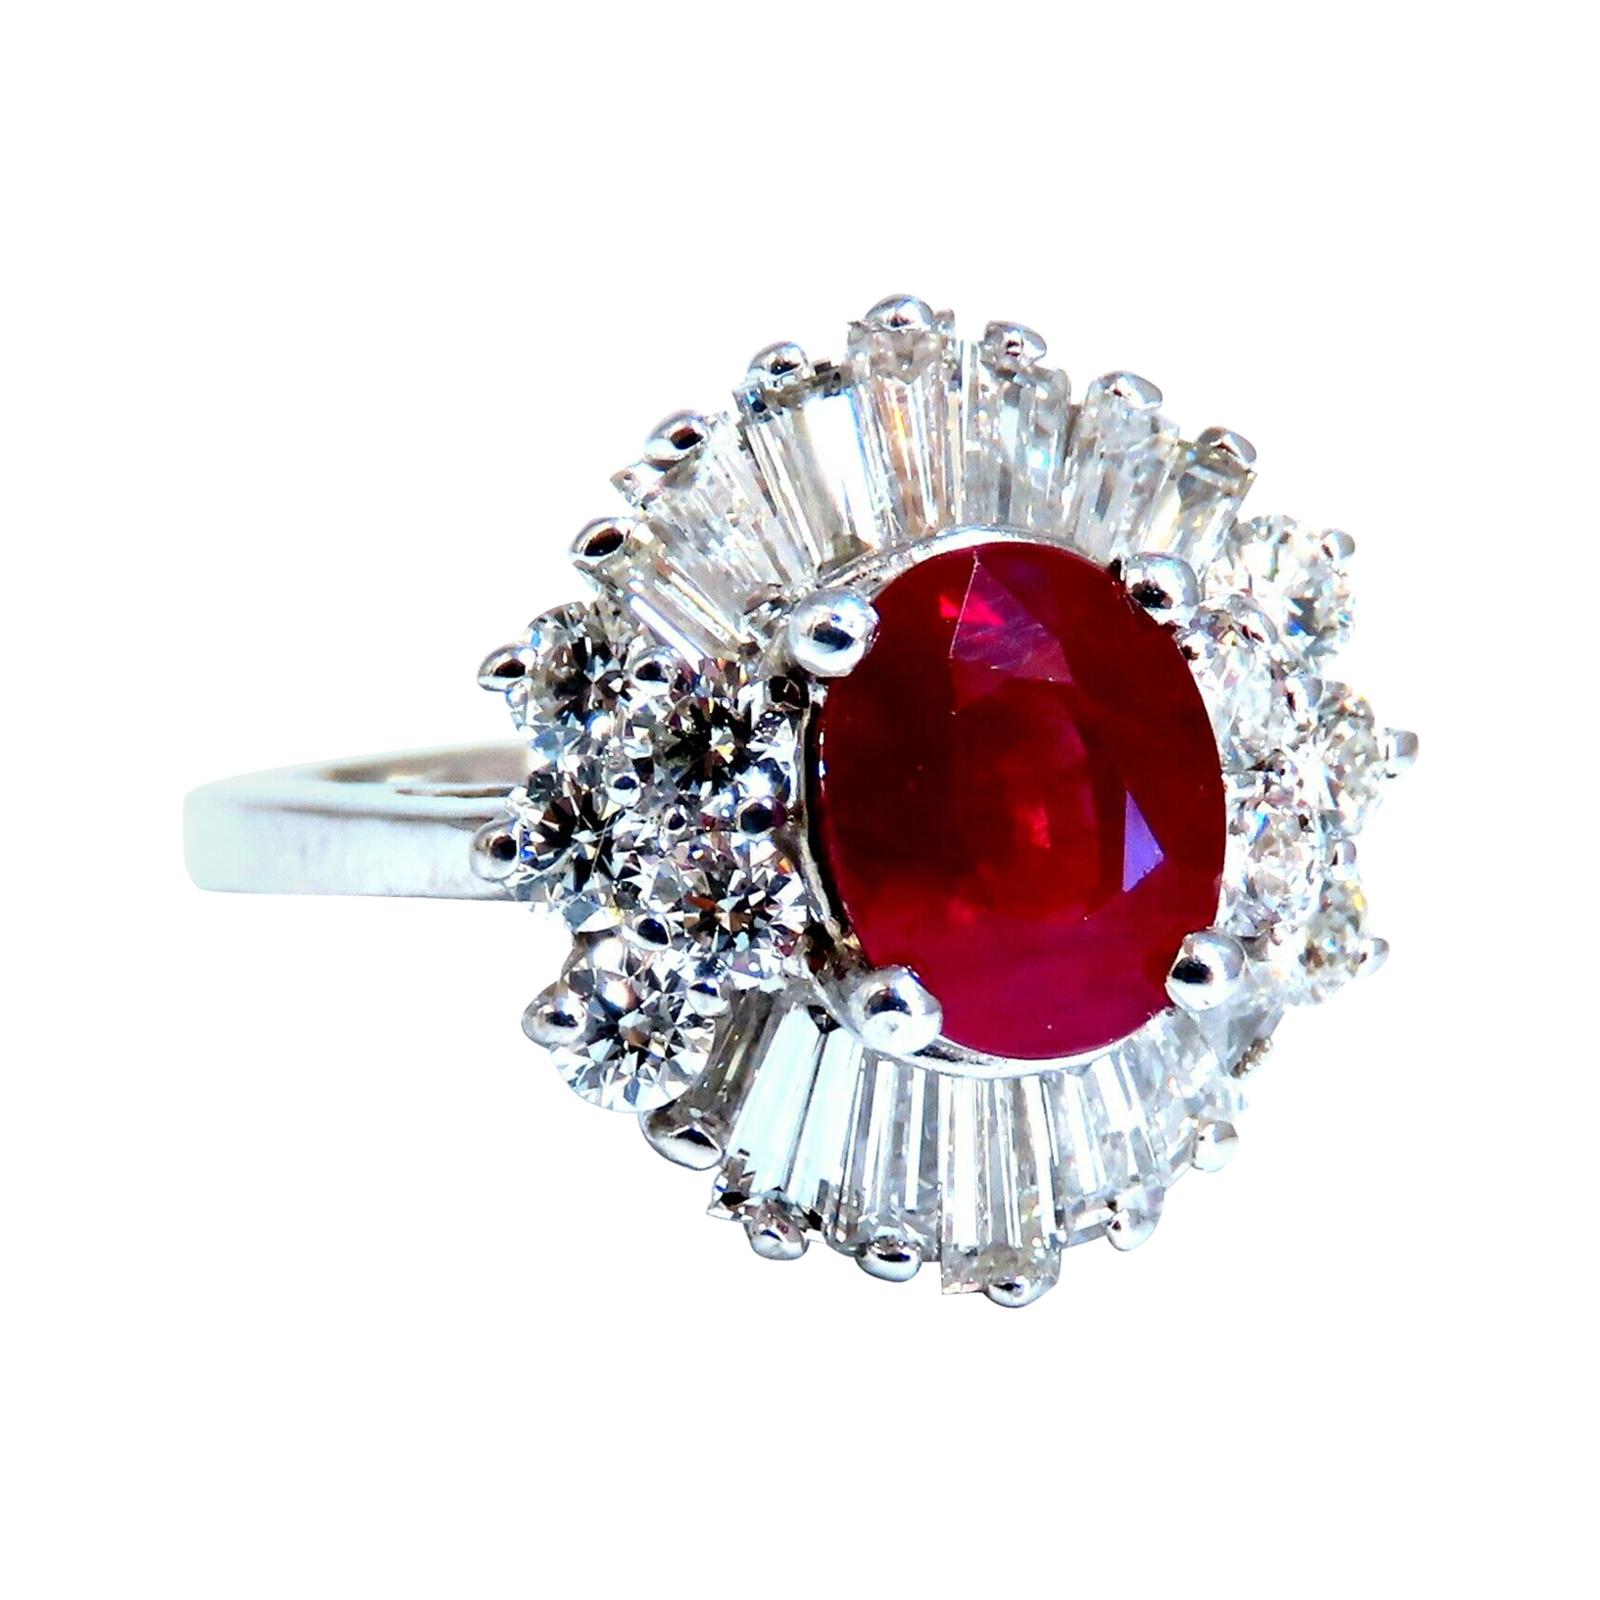 GIA Certified Burma Ruby 1.75ct Ballerina Cocktail Diamond Ring 14kt For Sale